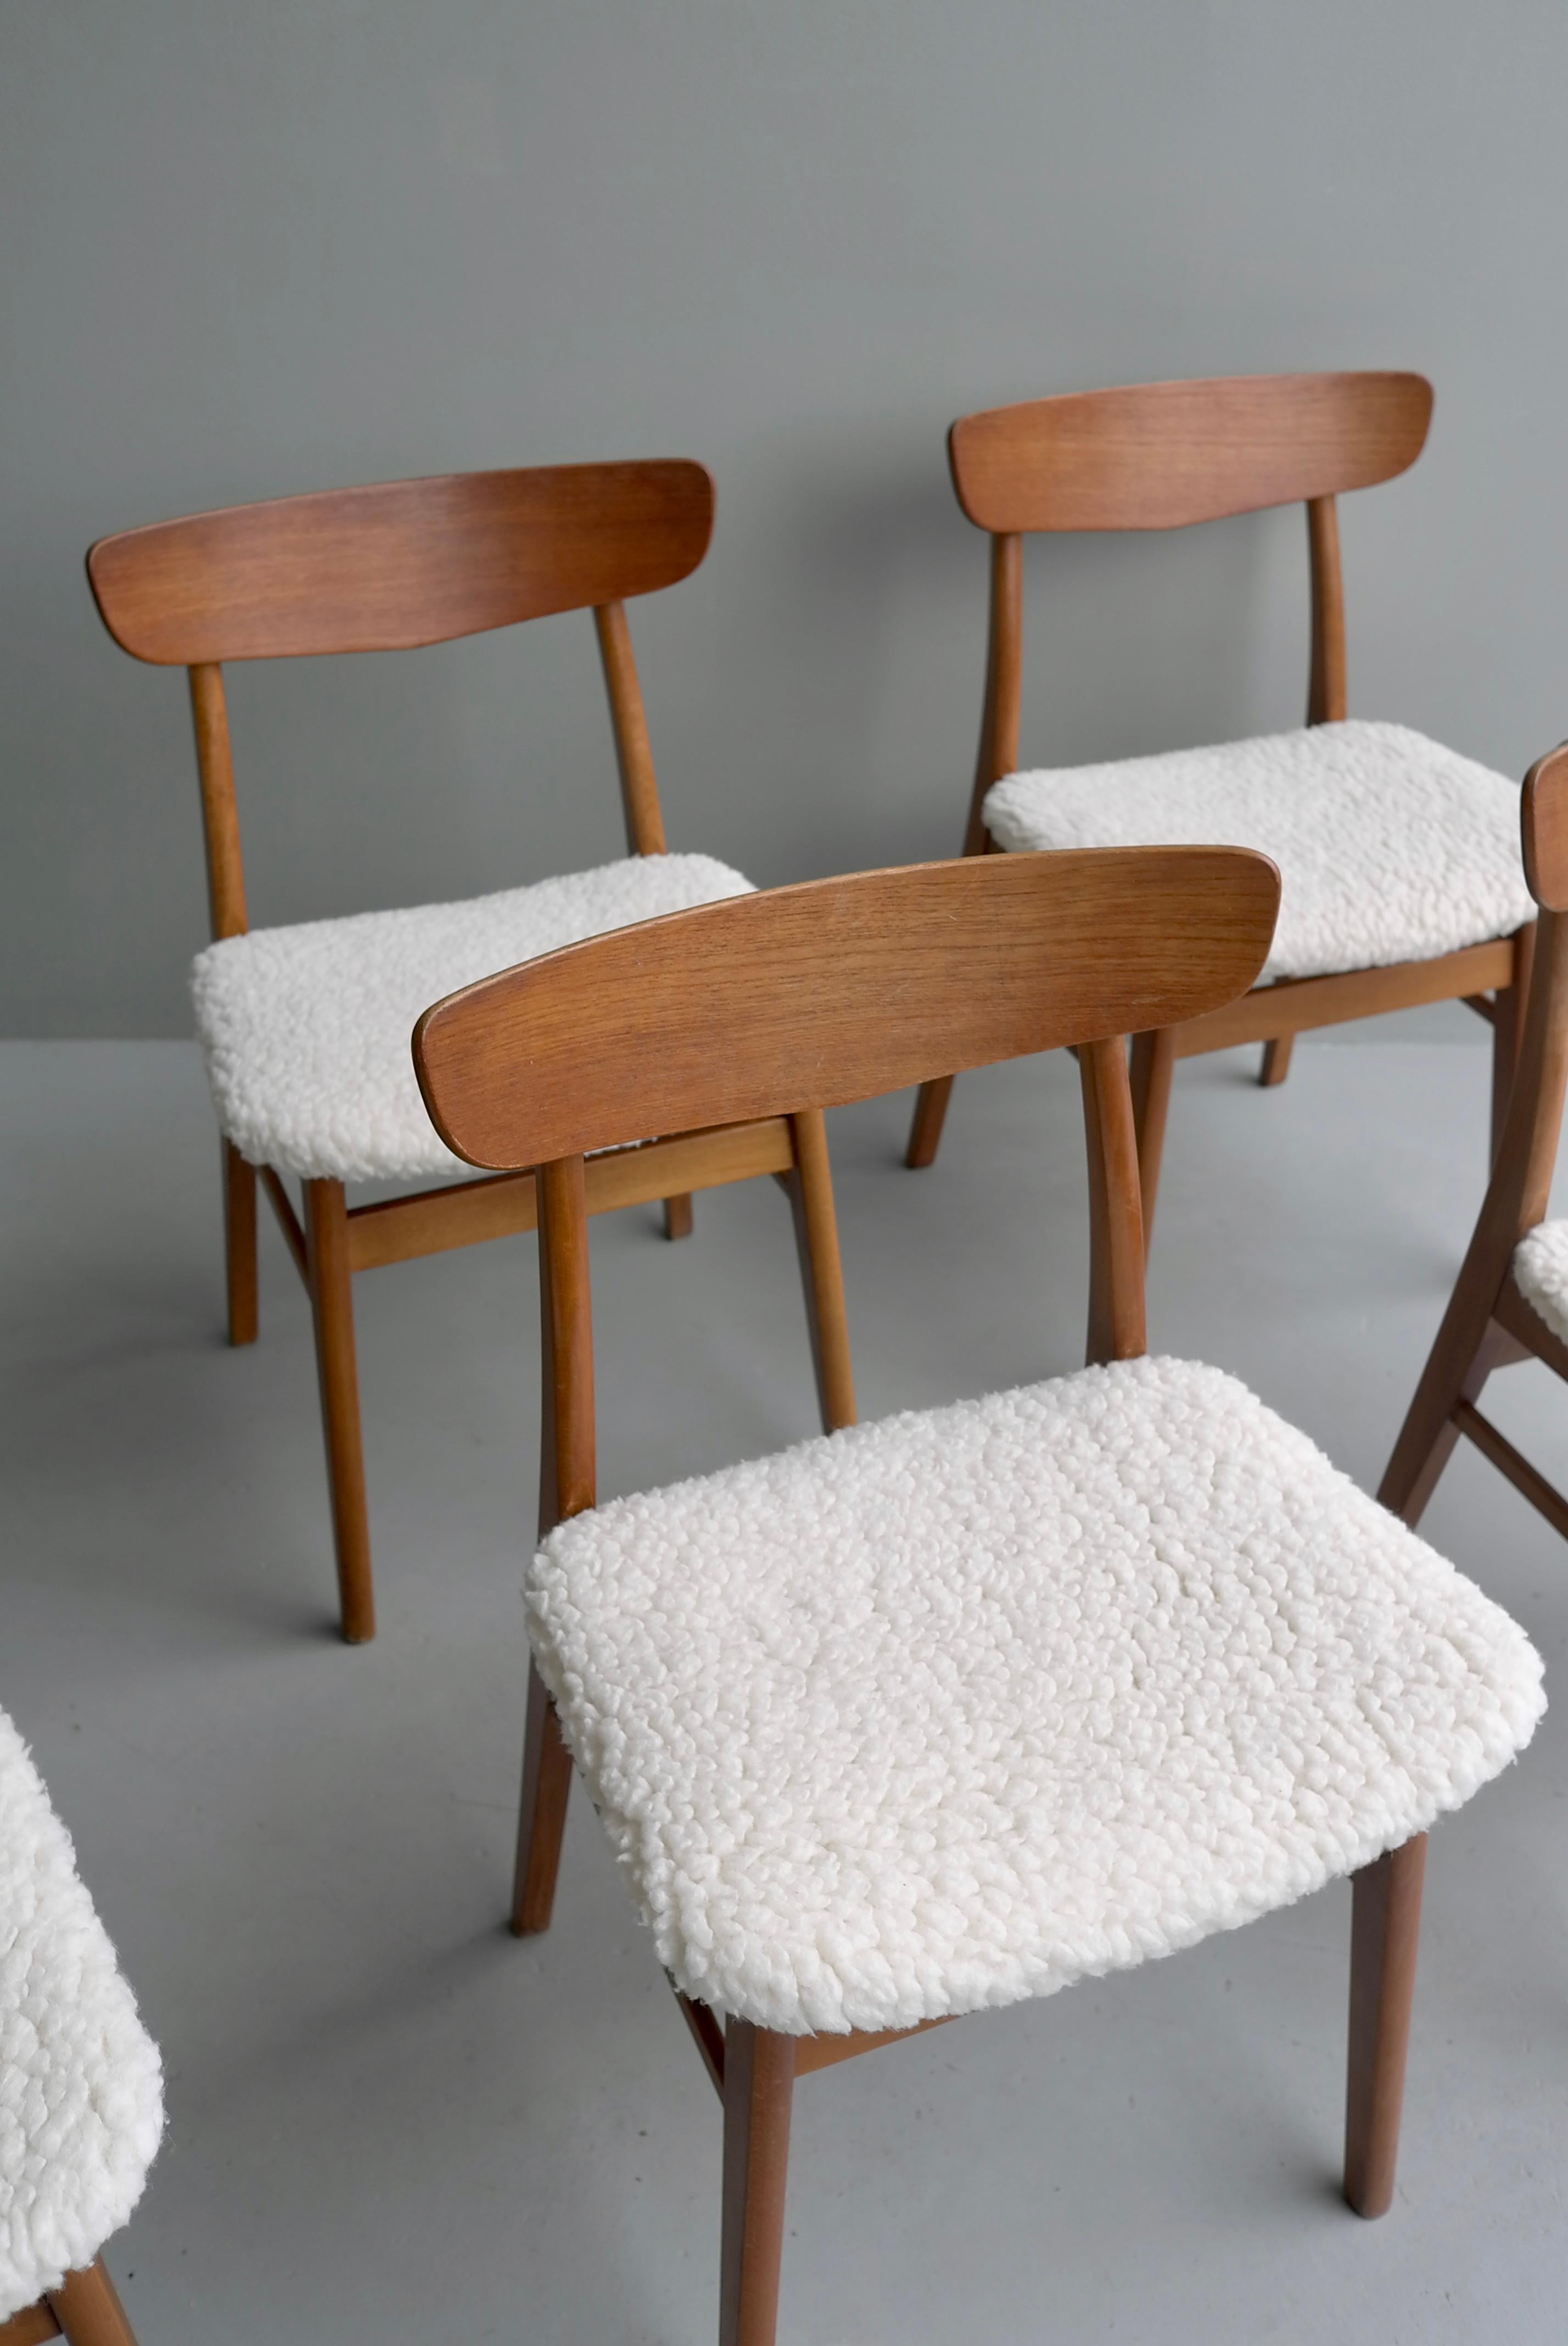 Six Teak Danish Heart Chairs with Seats in Pure Merino Wool, by Farstrup Møbler 11